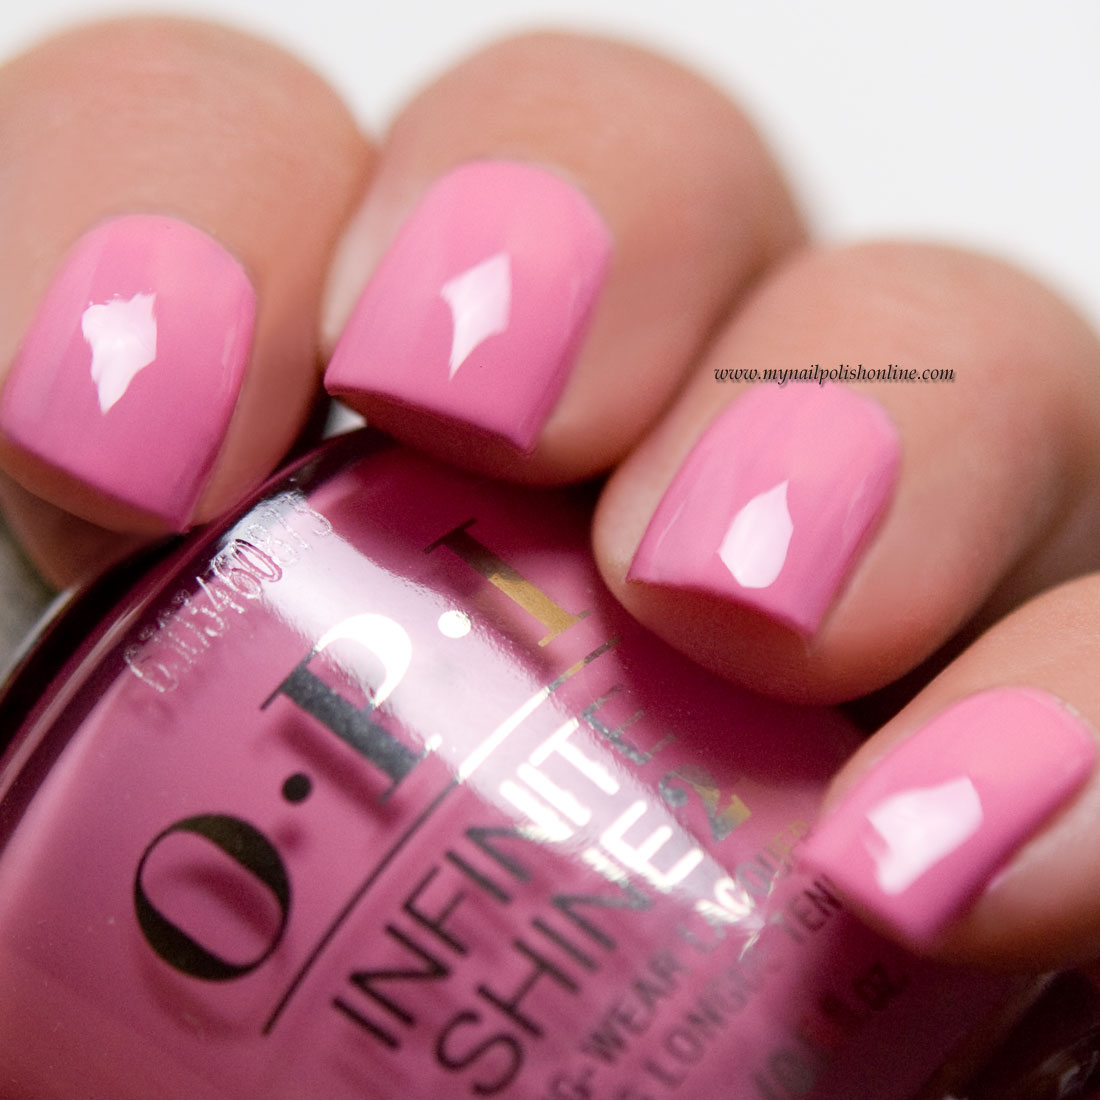 OPI - Lima Tell You About This Color